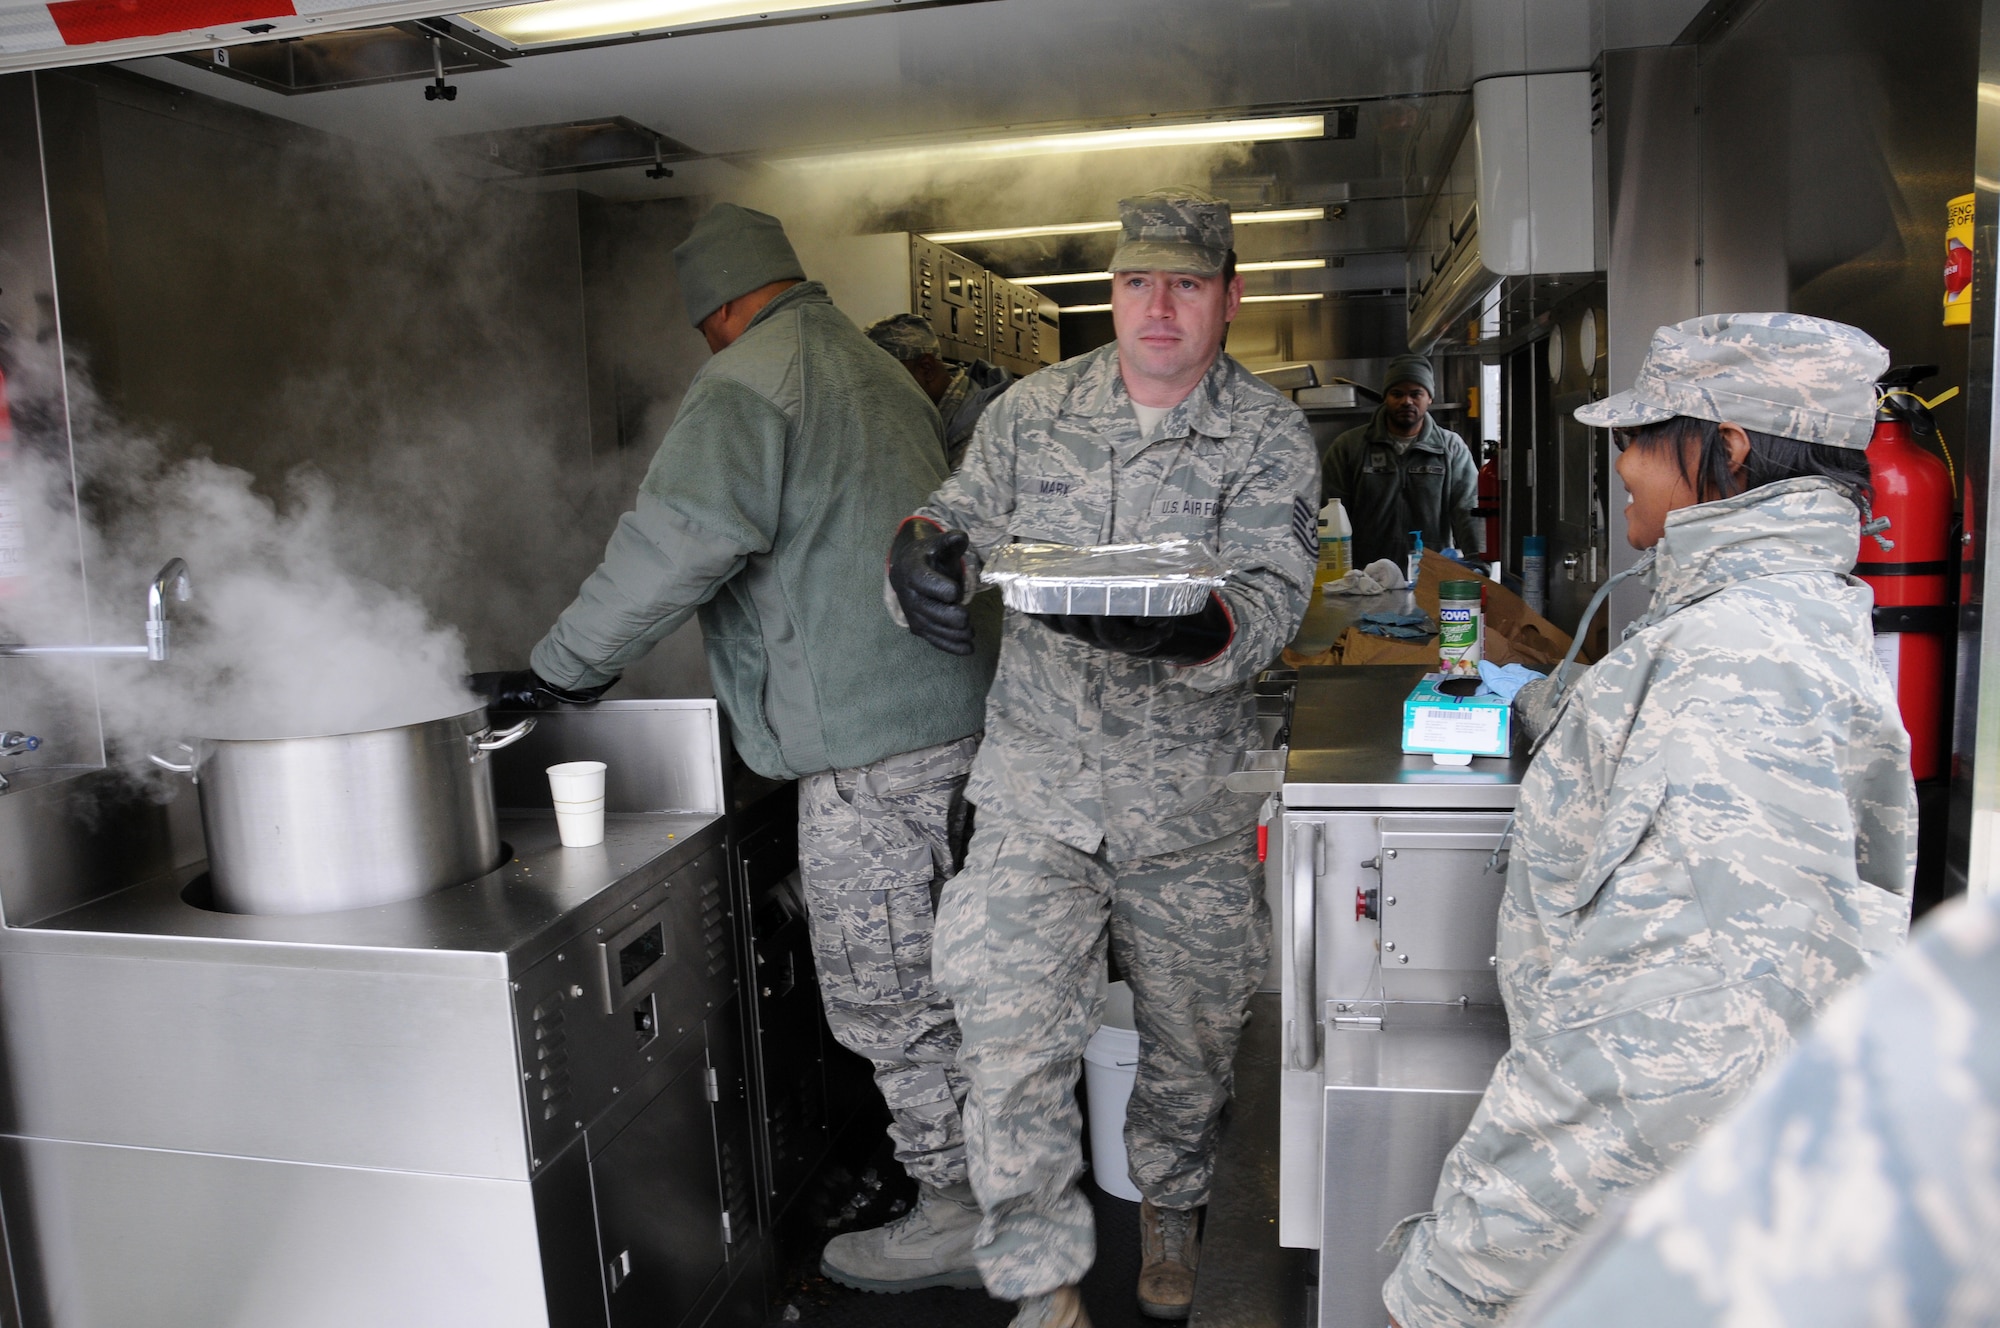 Tech. Sgt Marx from the 113th Force Support Squardon brings hot food to awaiting airman during a new mobile field kitchen during a demonstration at Joint Base Andrews, Md., Nov. 3. The Disaster Relief Mobile Kitchen Trailer  can deploy to natural disaster sites to provide hot meals to relief workers and Airmen working in austere conditions. (U.S. Air force photo by Airman 1st Class Sumena Leslie/Released)